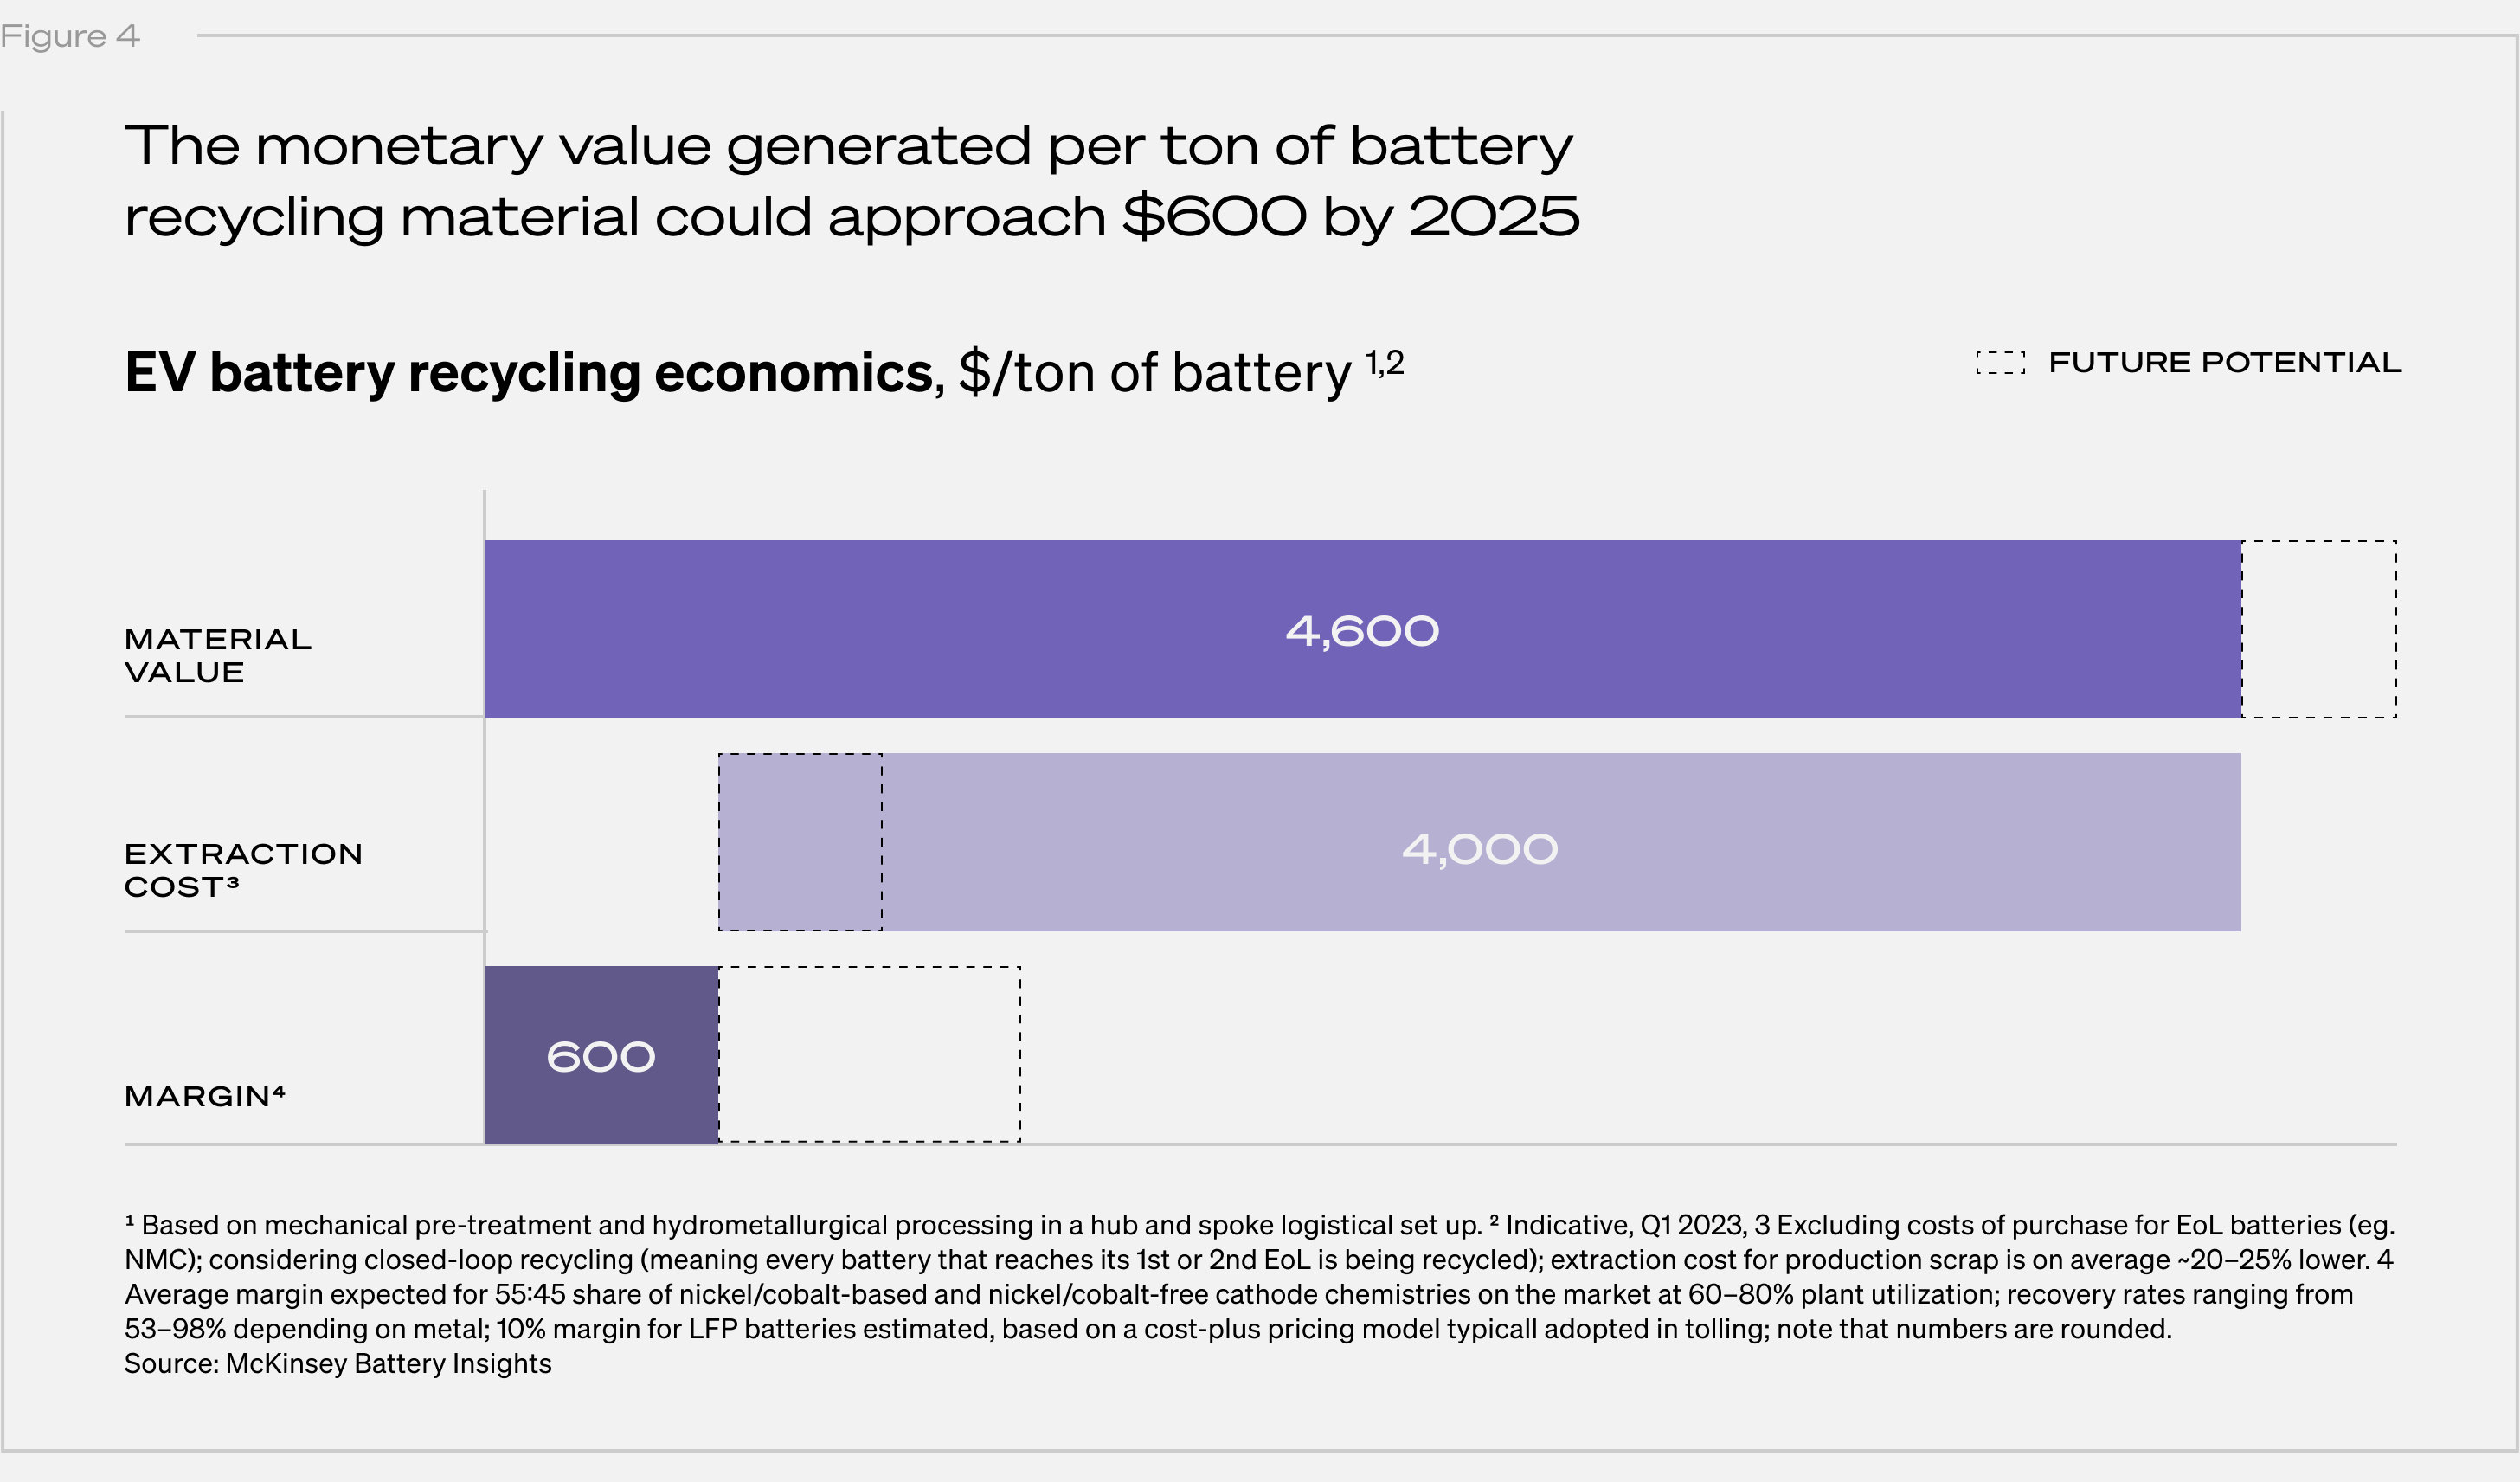 The monetary value generated per ton of battery recycling material.